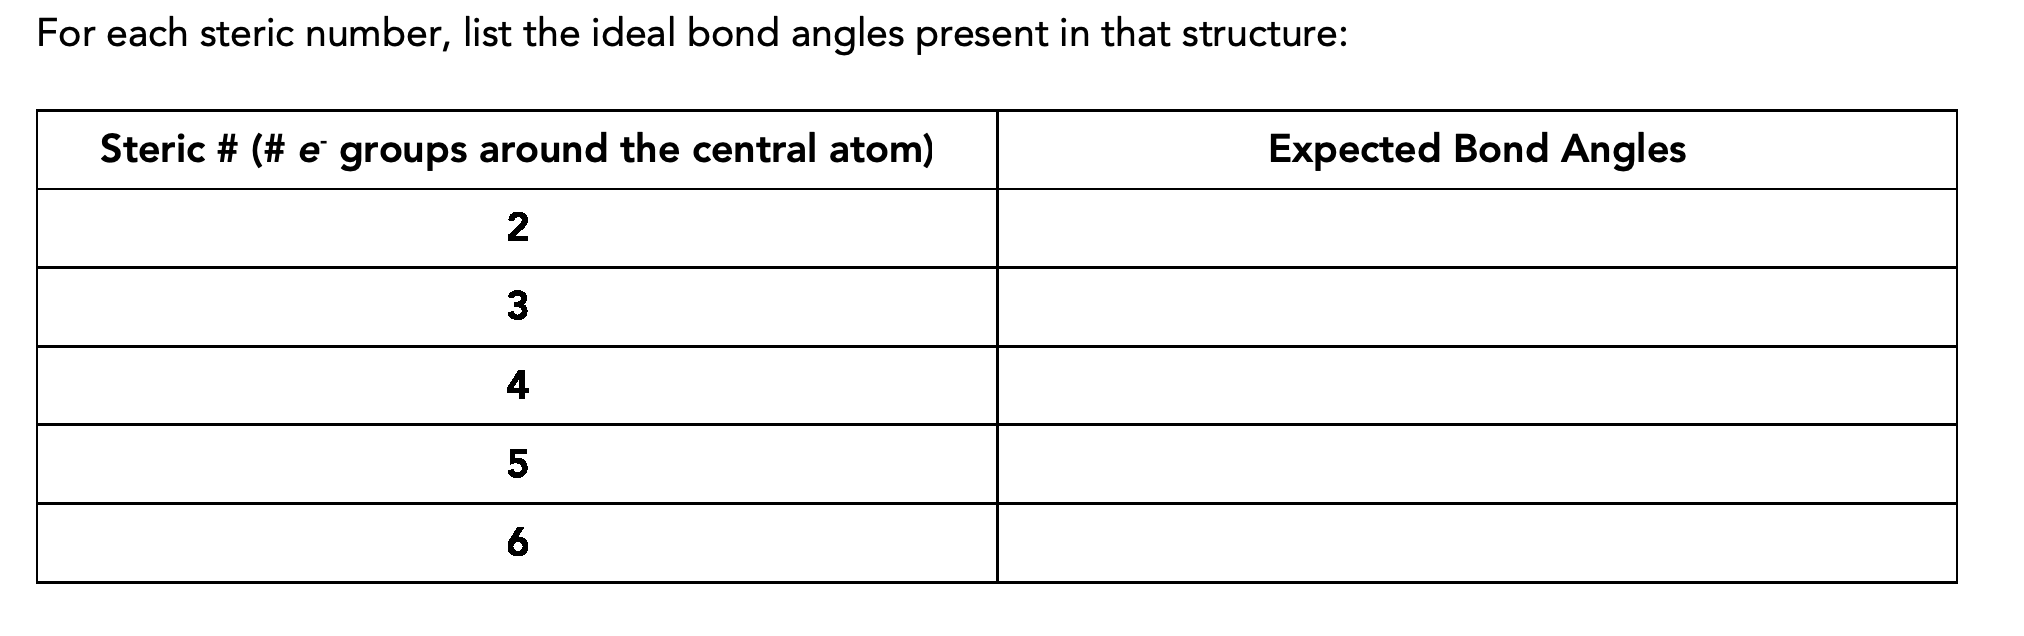 For each steric number, list the ideal bond angles present in that structure:
Steric # (# e groups around the central atom)
Expected Bond Angles
2
3
4
5
